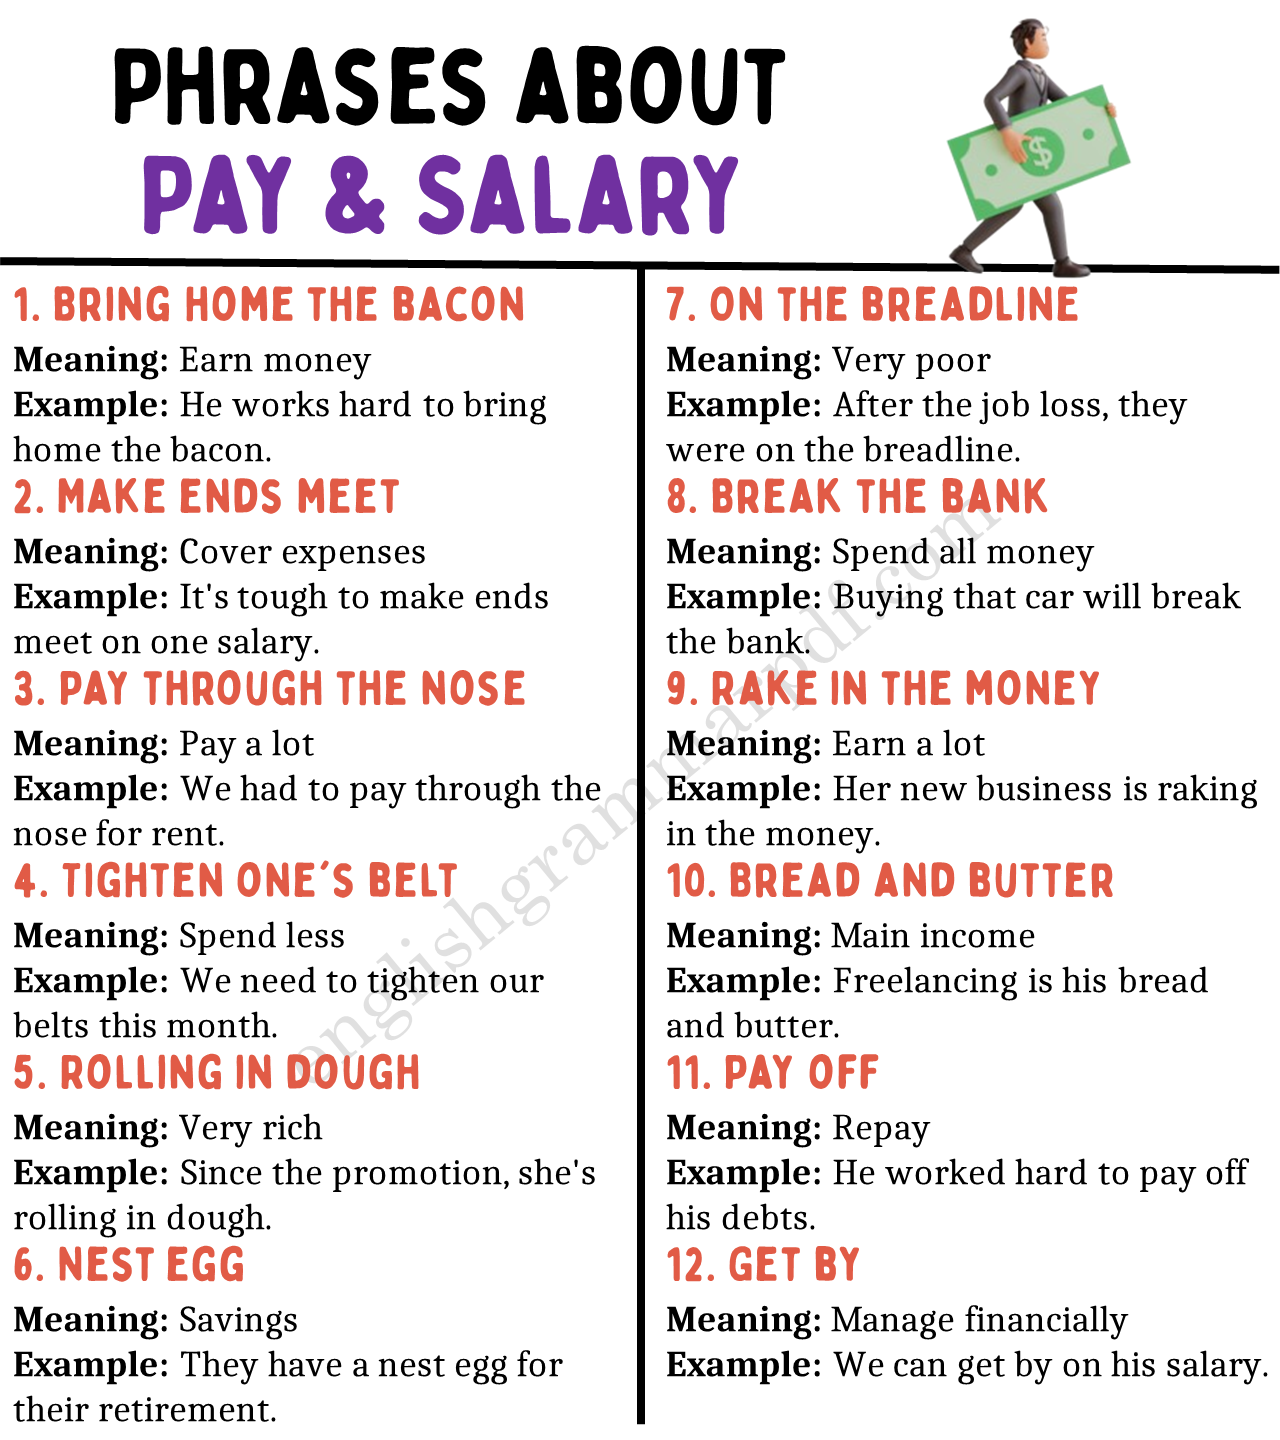 Idiomatic Ways to Talk about Pay and Salary in English